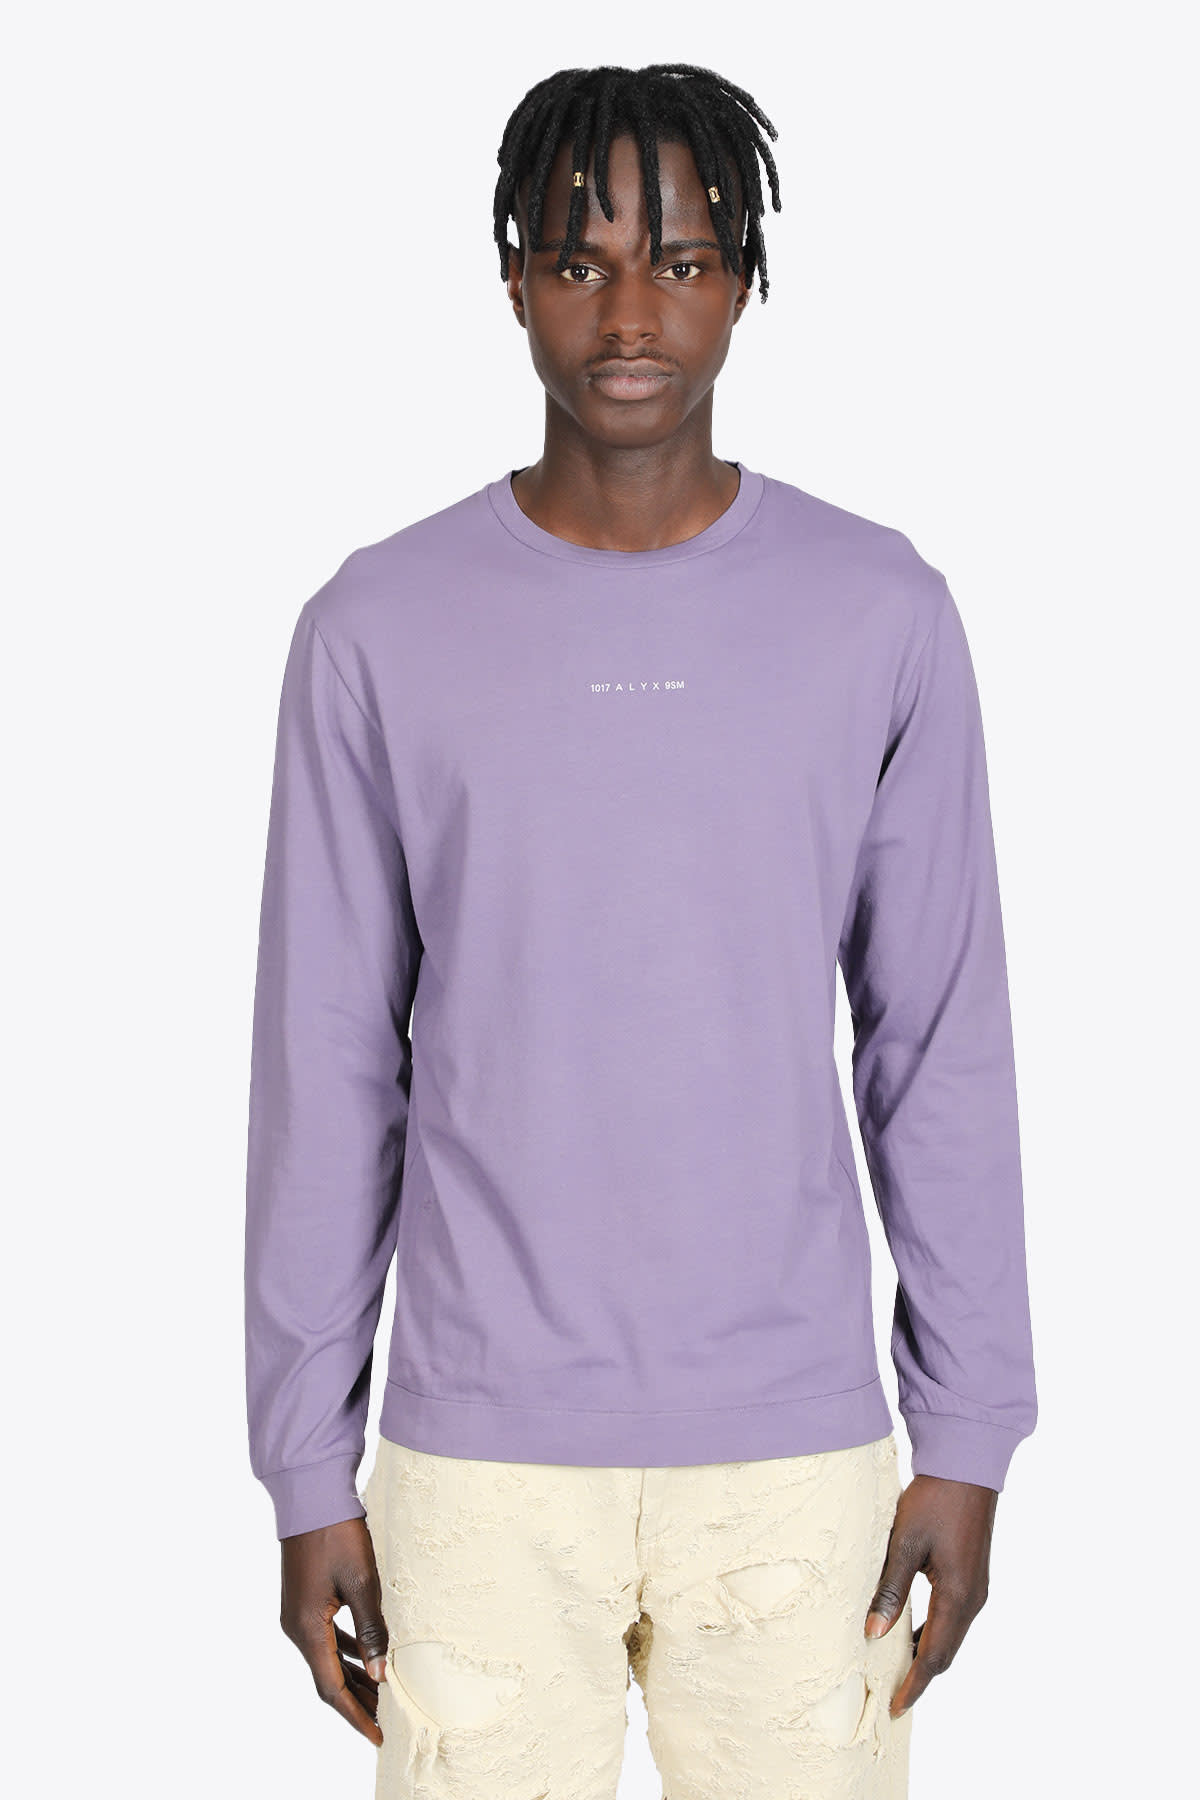 1017 ALYX 9SM Graphic L/s T-shirt Lilac cotton long sleeved t-shirt